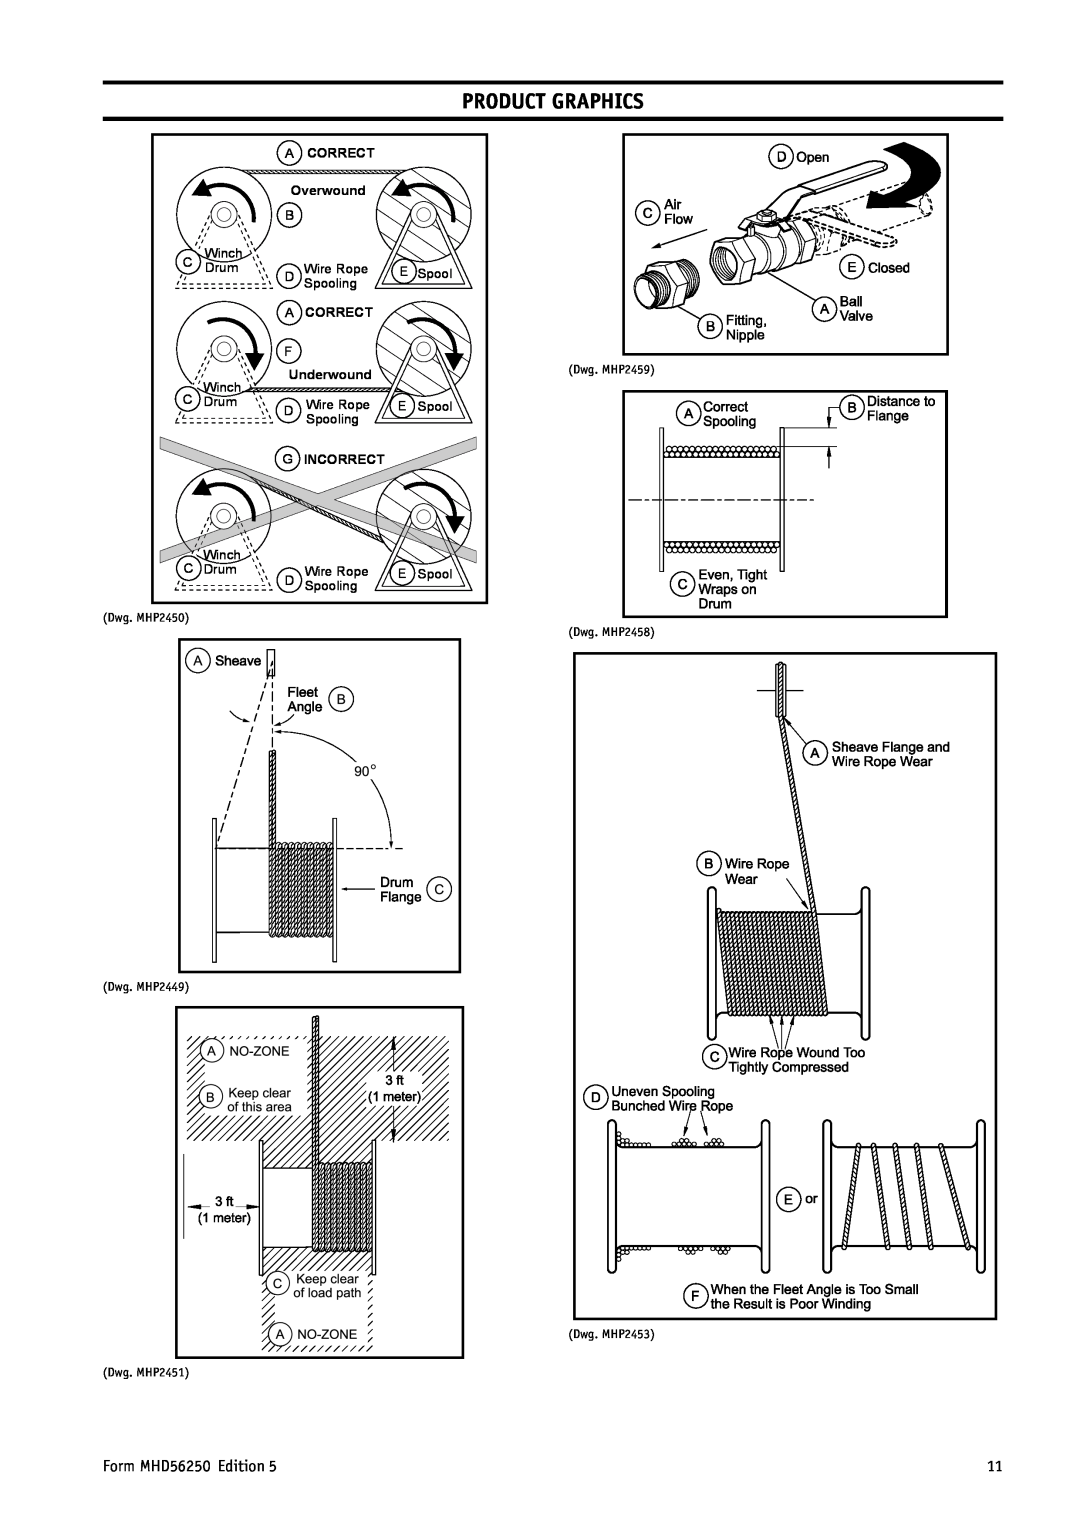 Ingersoll-Rand manual Product Graphics, Form MHD56250 Edition, Correct, Overwound, Underwound, G Incorrect 